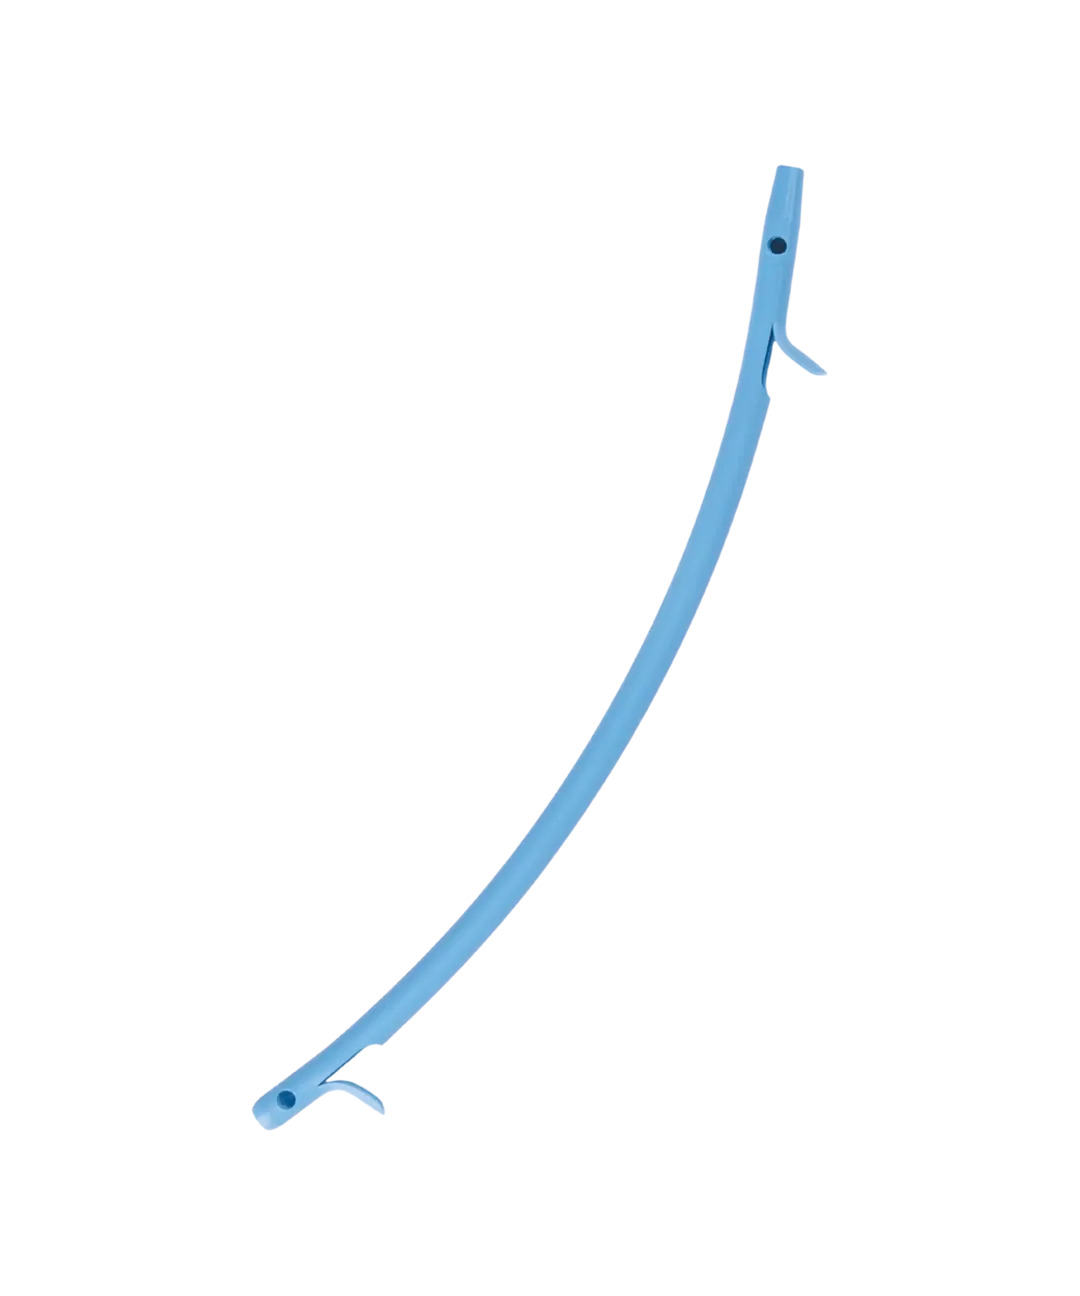 Biliary Drainage Catheter With Introducer System